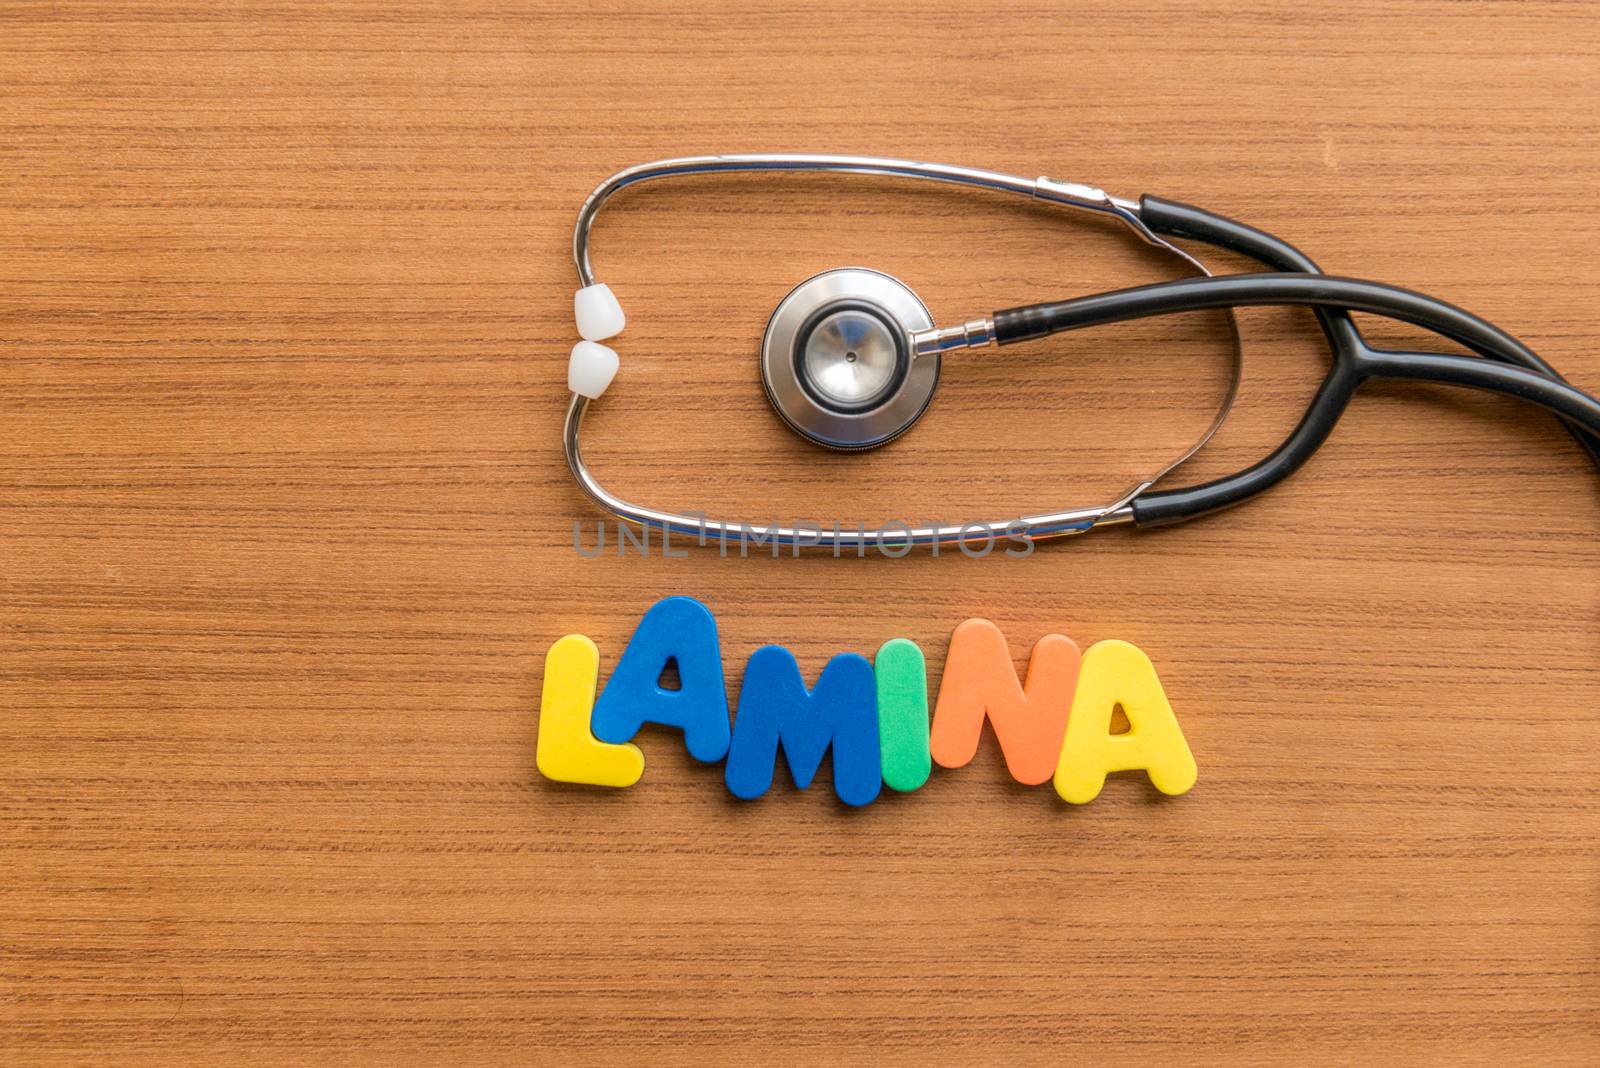 lamina colorful word with Stethoscope on wooden background